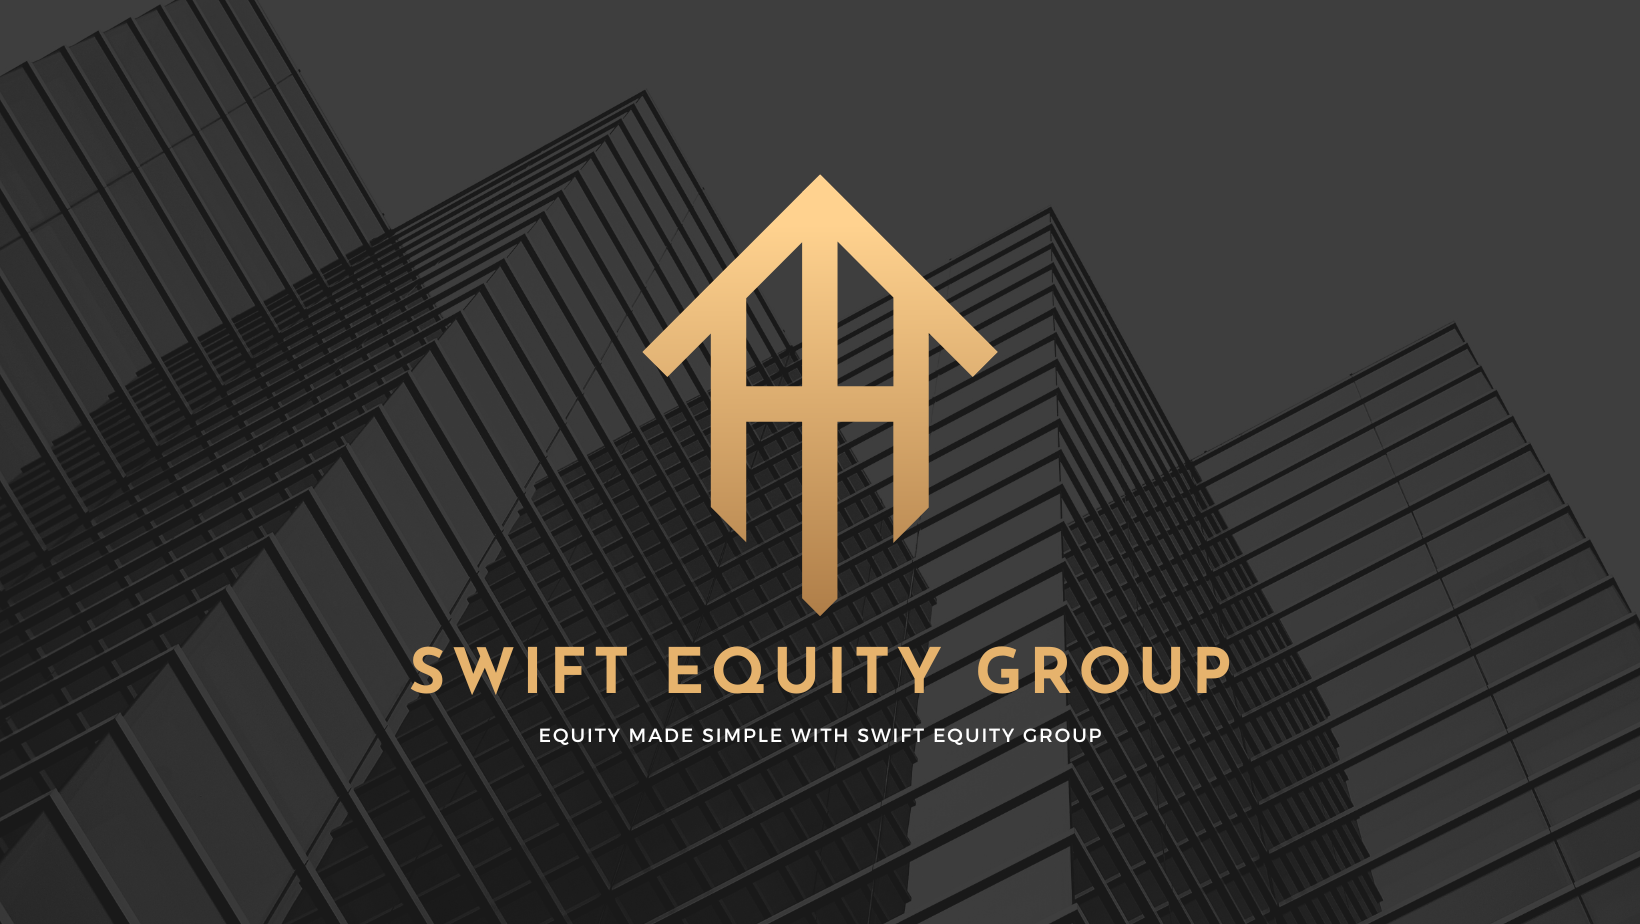 Equity Made Simple With Swift Equity Group